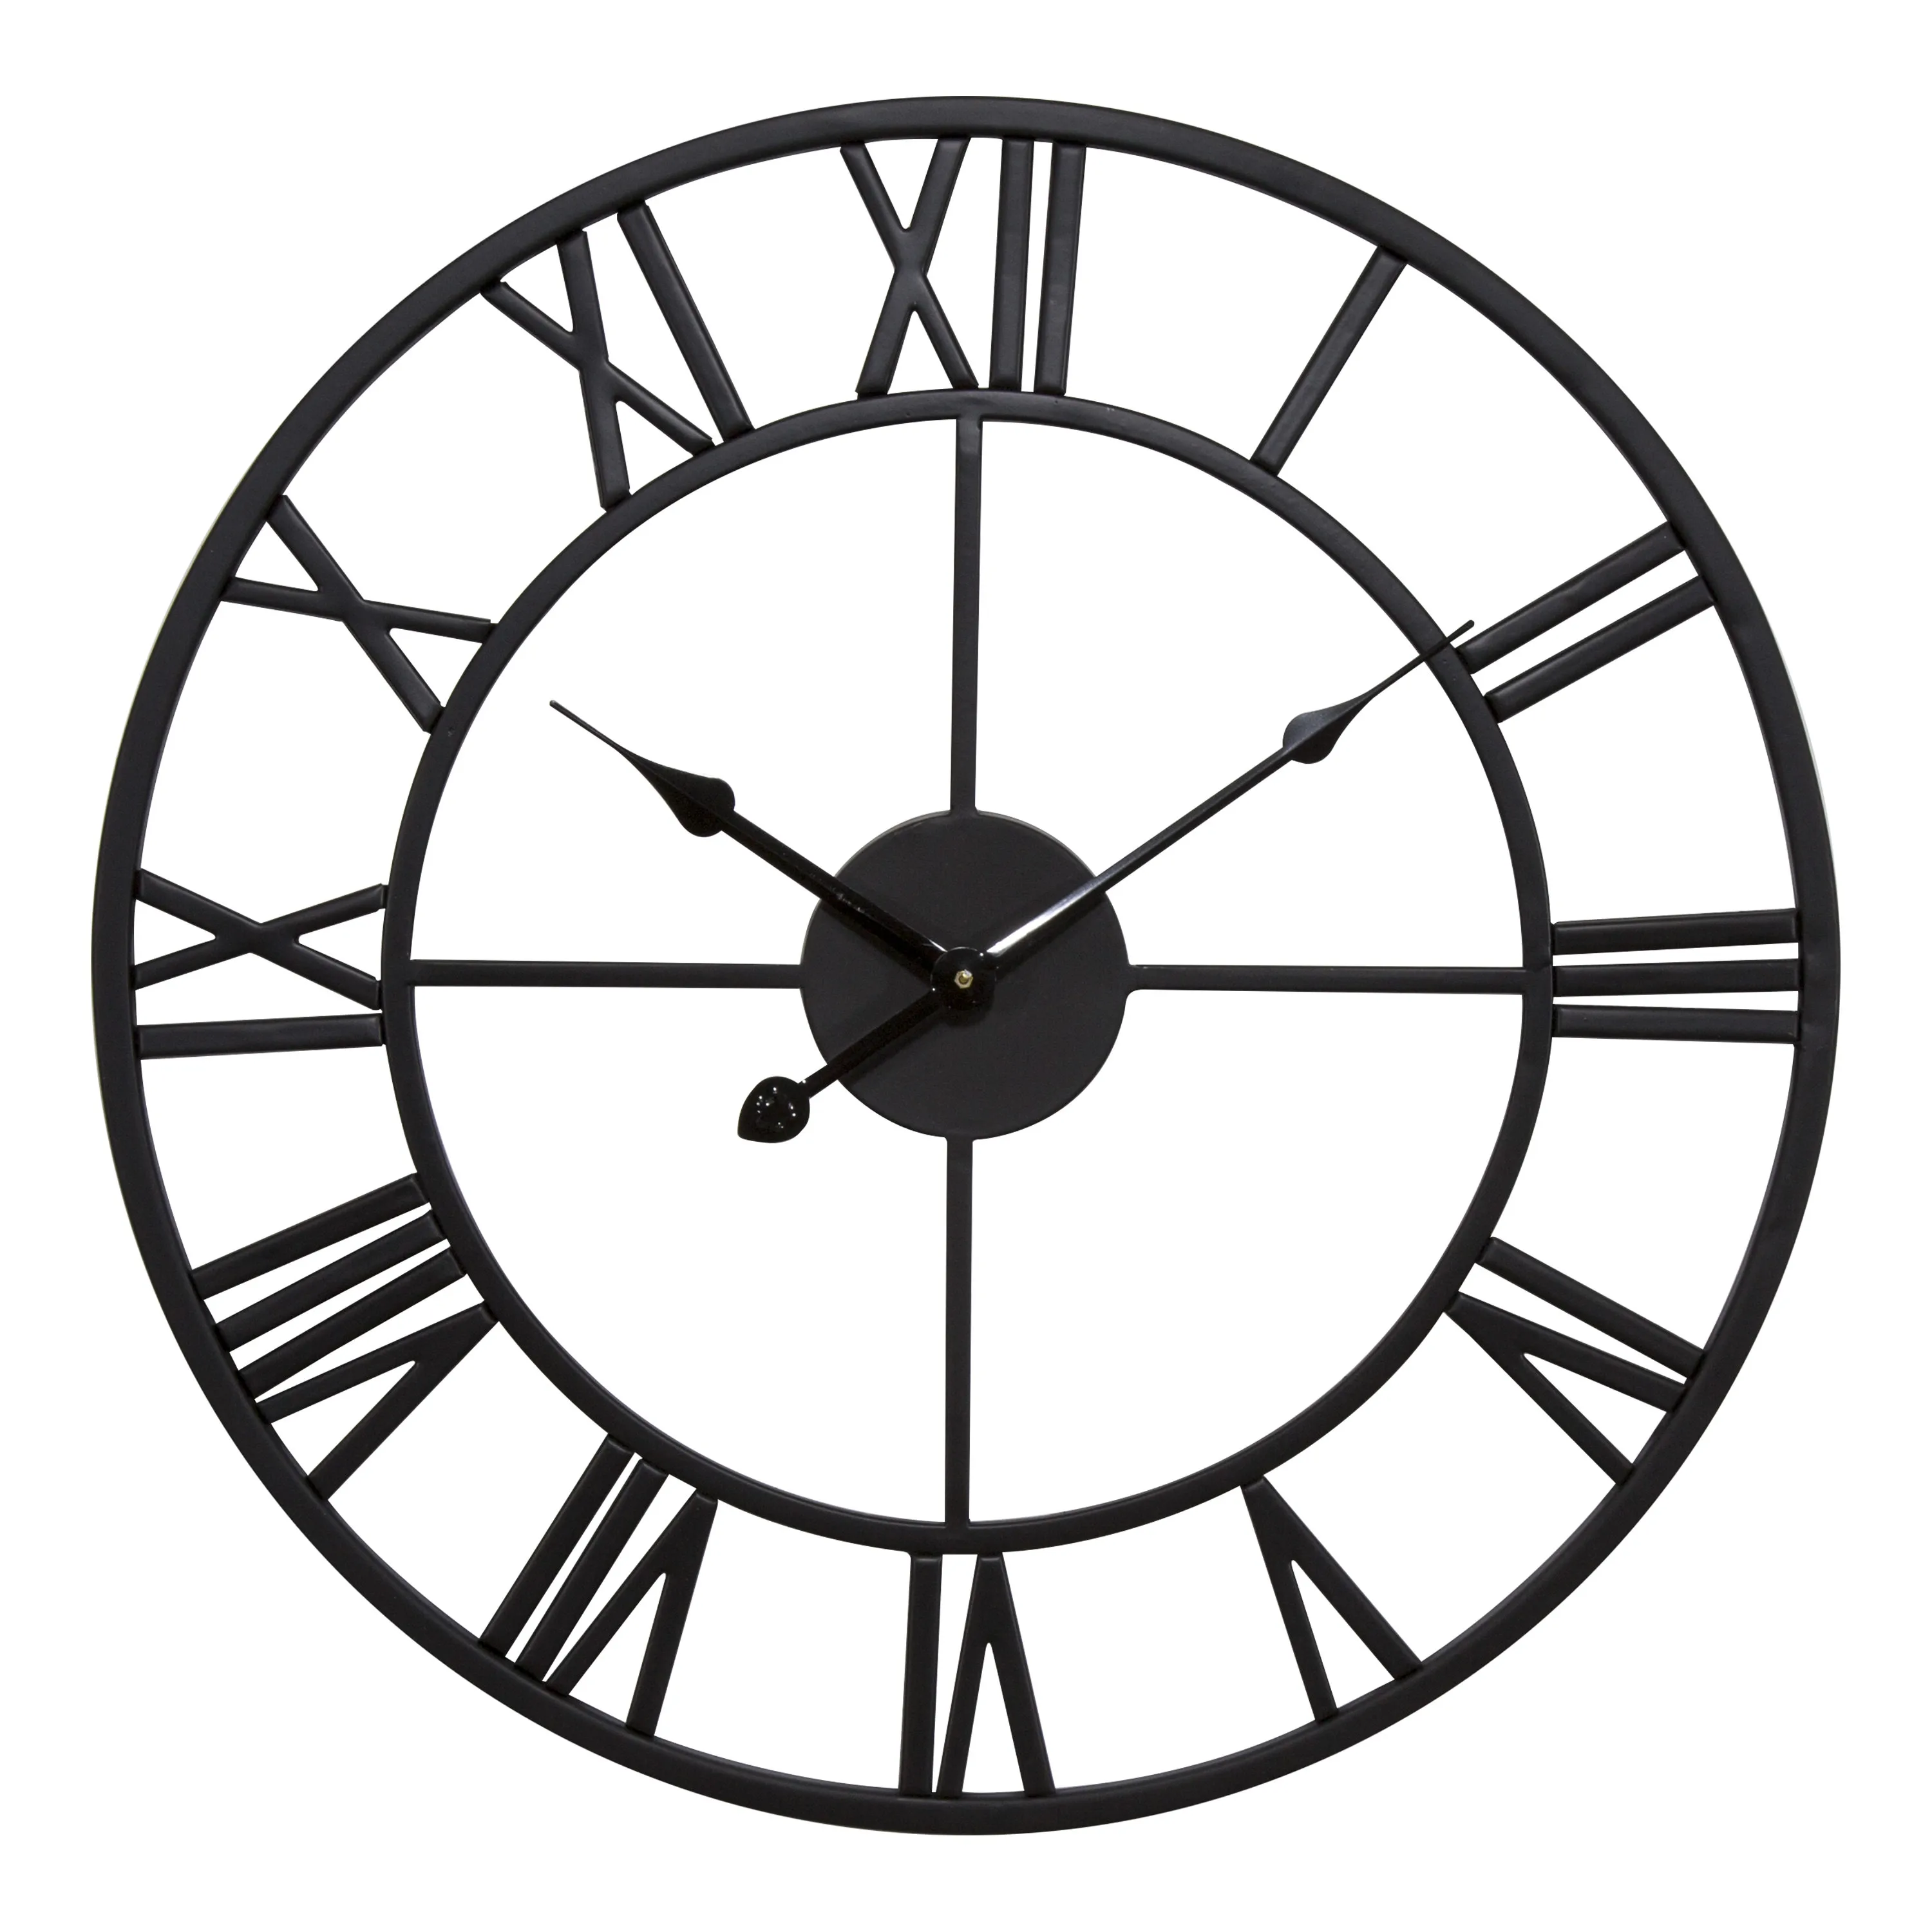 Petyoung 60cm Round Numbers Large Clock Metal Wall Clock Round Numbers Large Clock Vintage Industrial Design Decoration